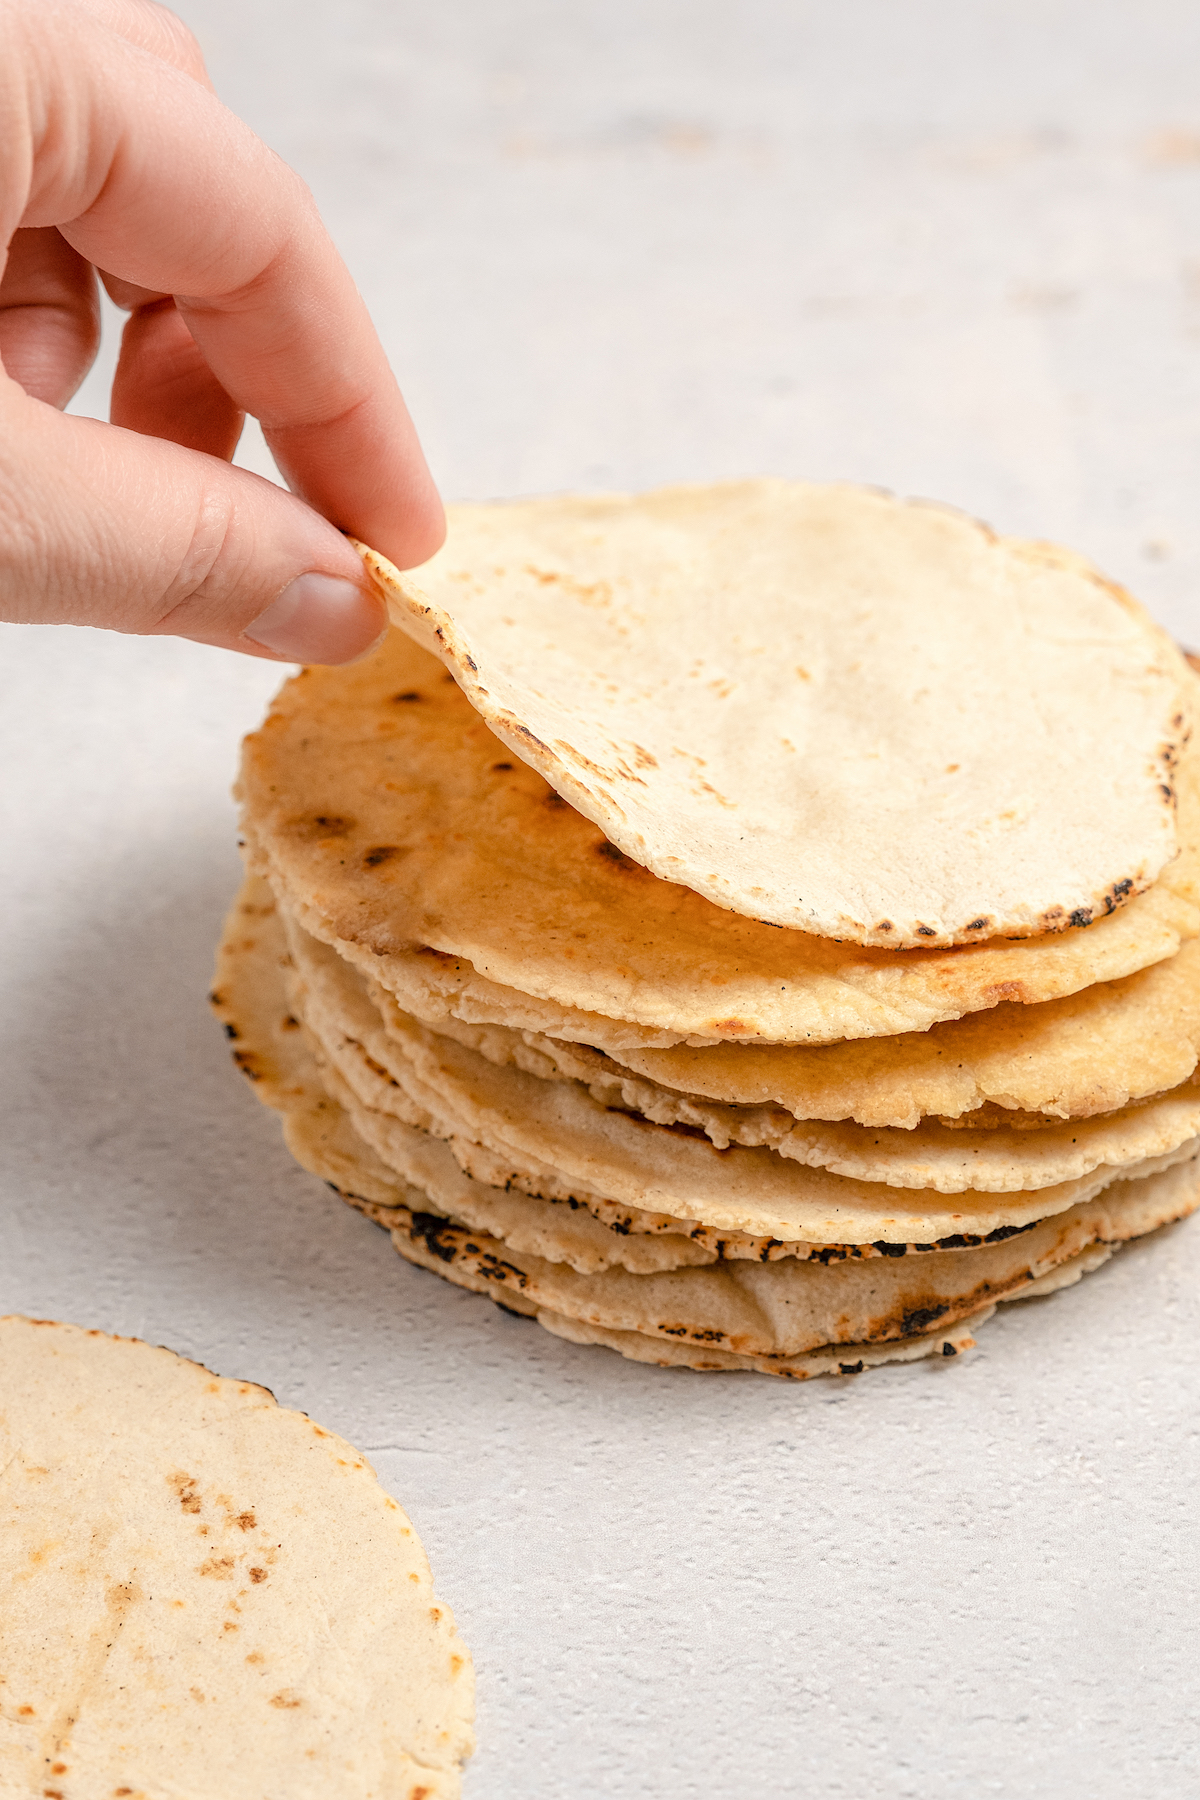 Lifting a tortilla from the stack.